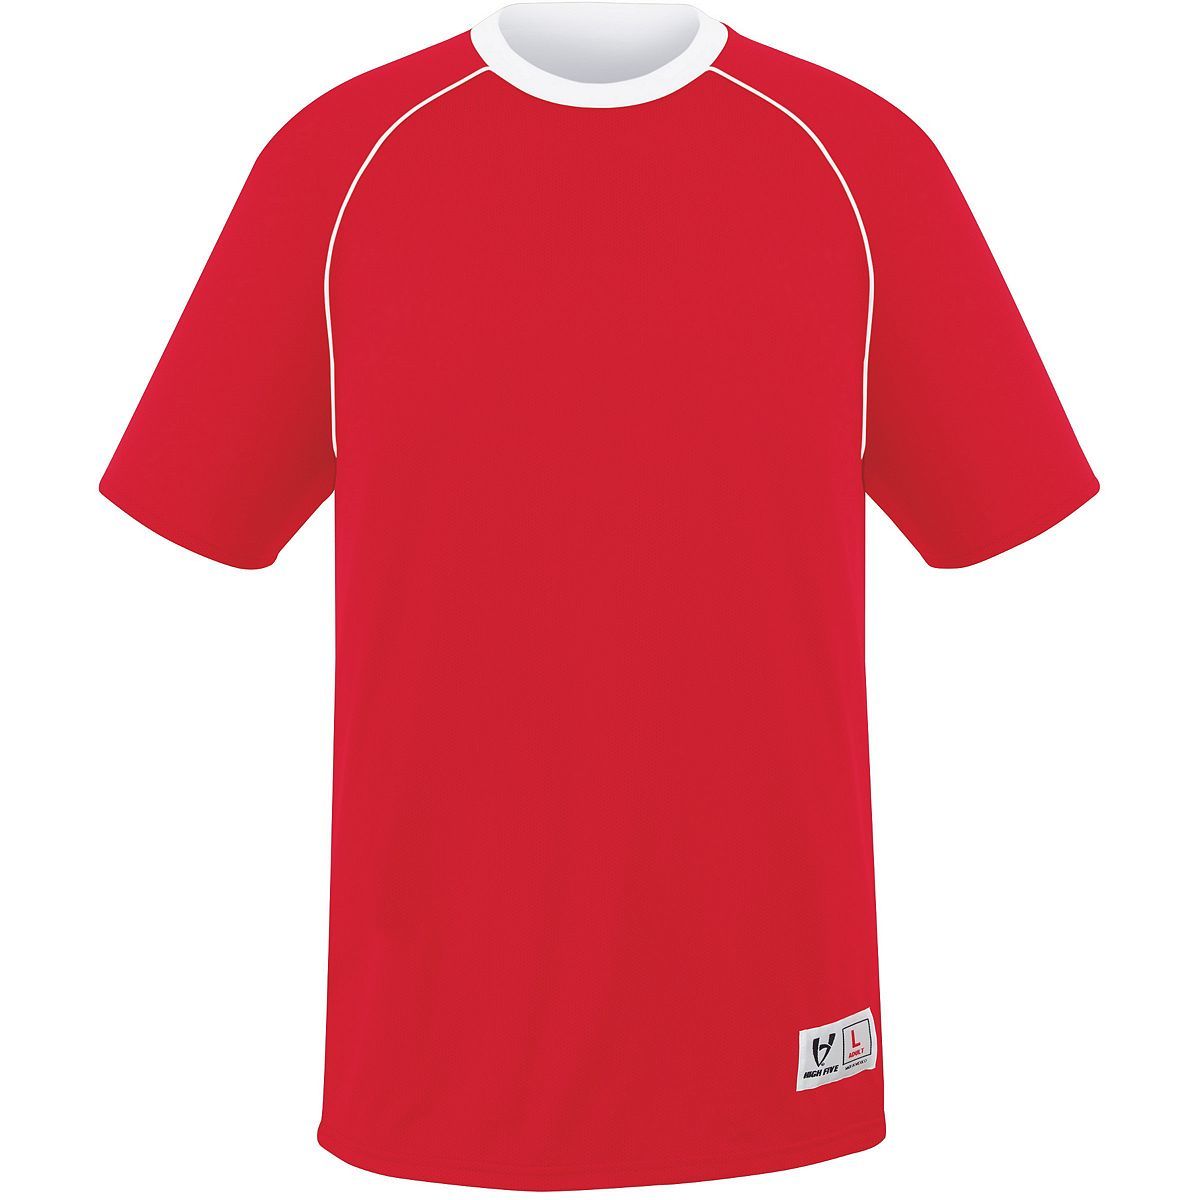 High 5 Youth Conversion Reversible Jersey in Scarlet/White  -Part of the Youth, Youth-Jersey, High5-Products, Soccer, Shirts, All-Sports-1 product lines at KanaleyCreations.com